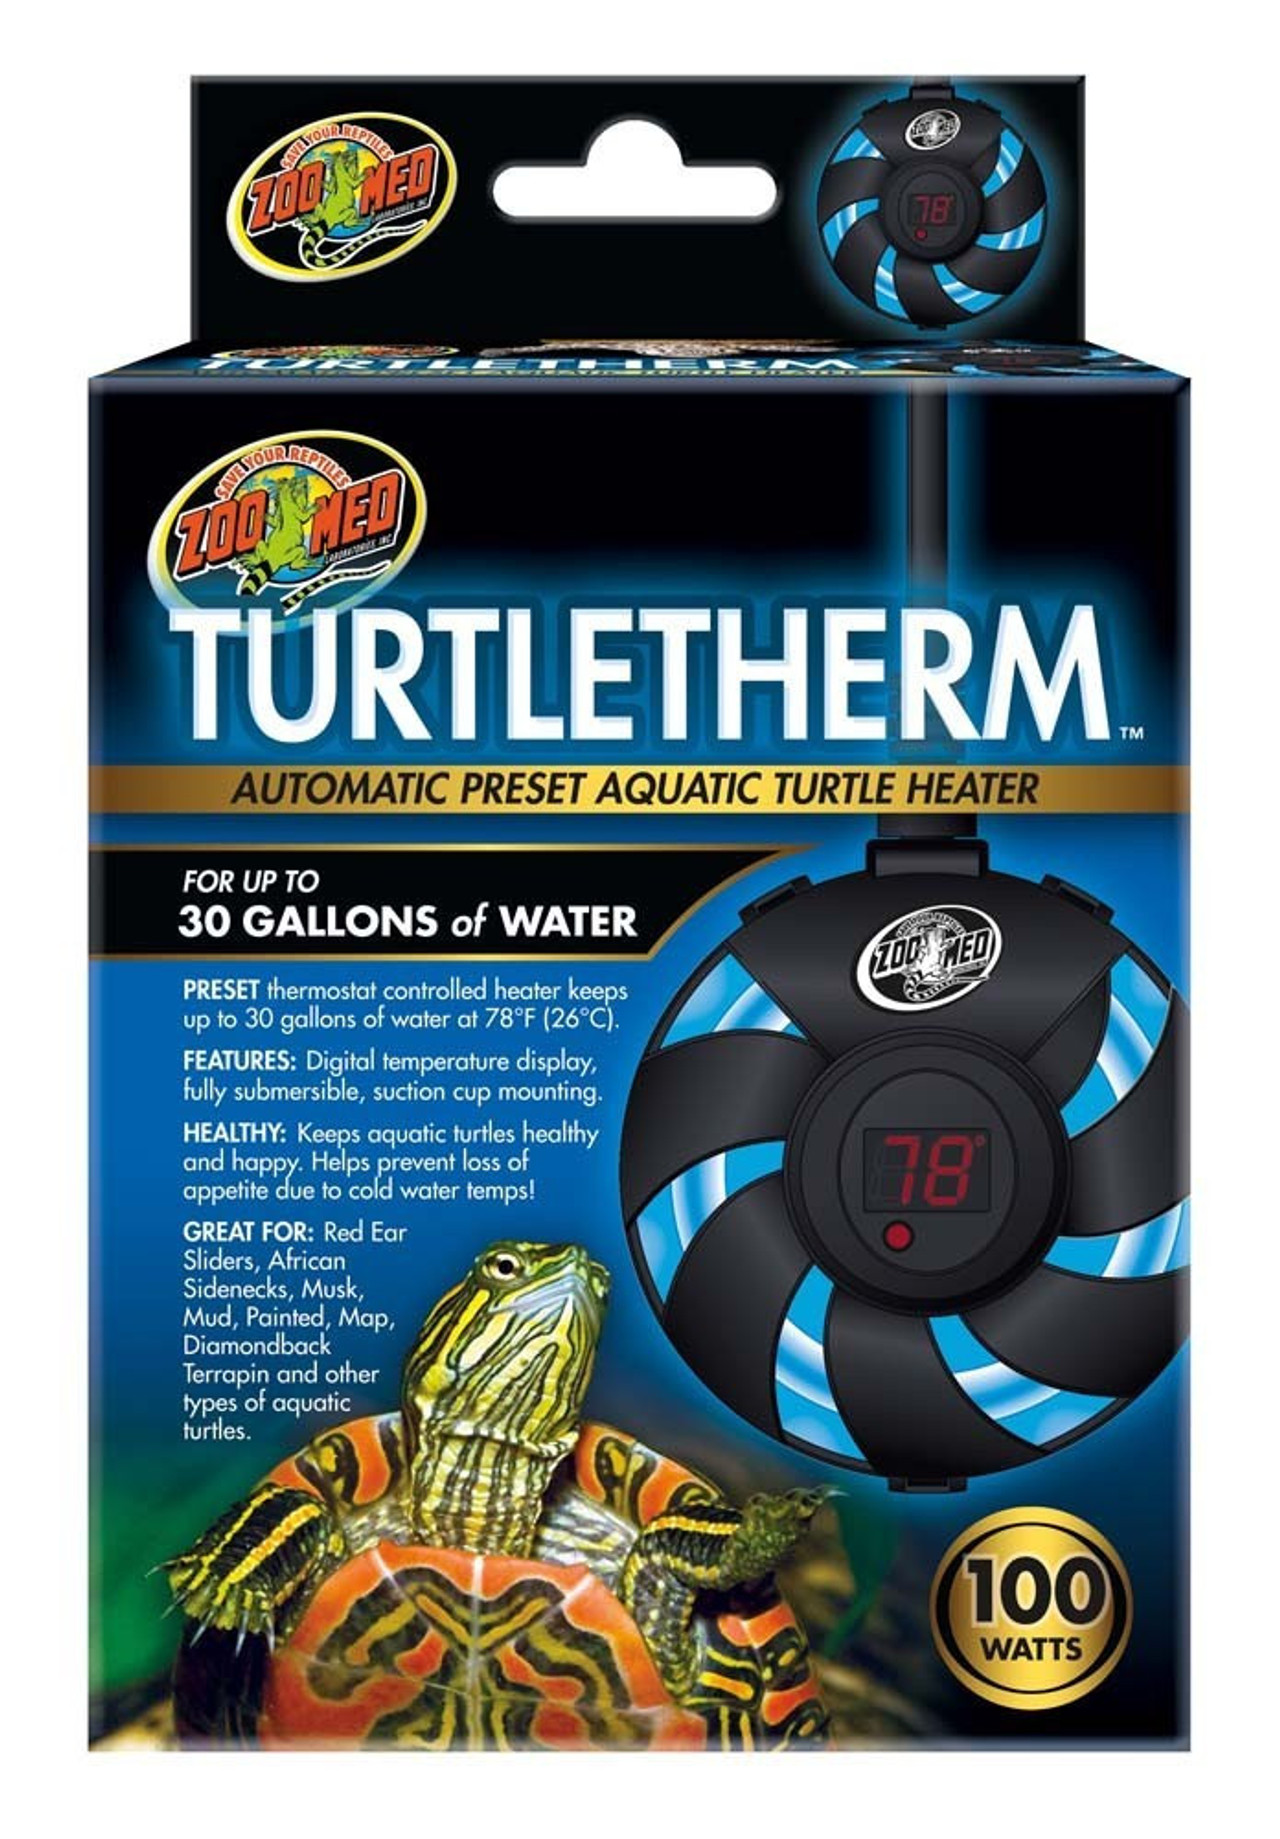 Zoo Med Turtletherm Aquatic Turtle Heater 100watt - The Tye-Dyed Iguana -  Reptiles and Reptile Supplies in St. Louis.